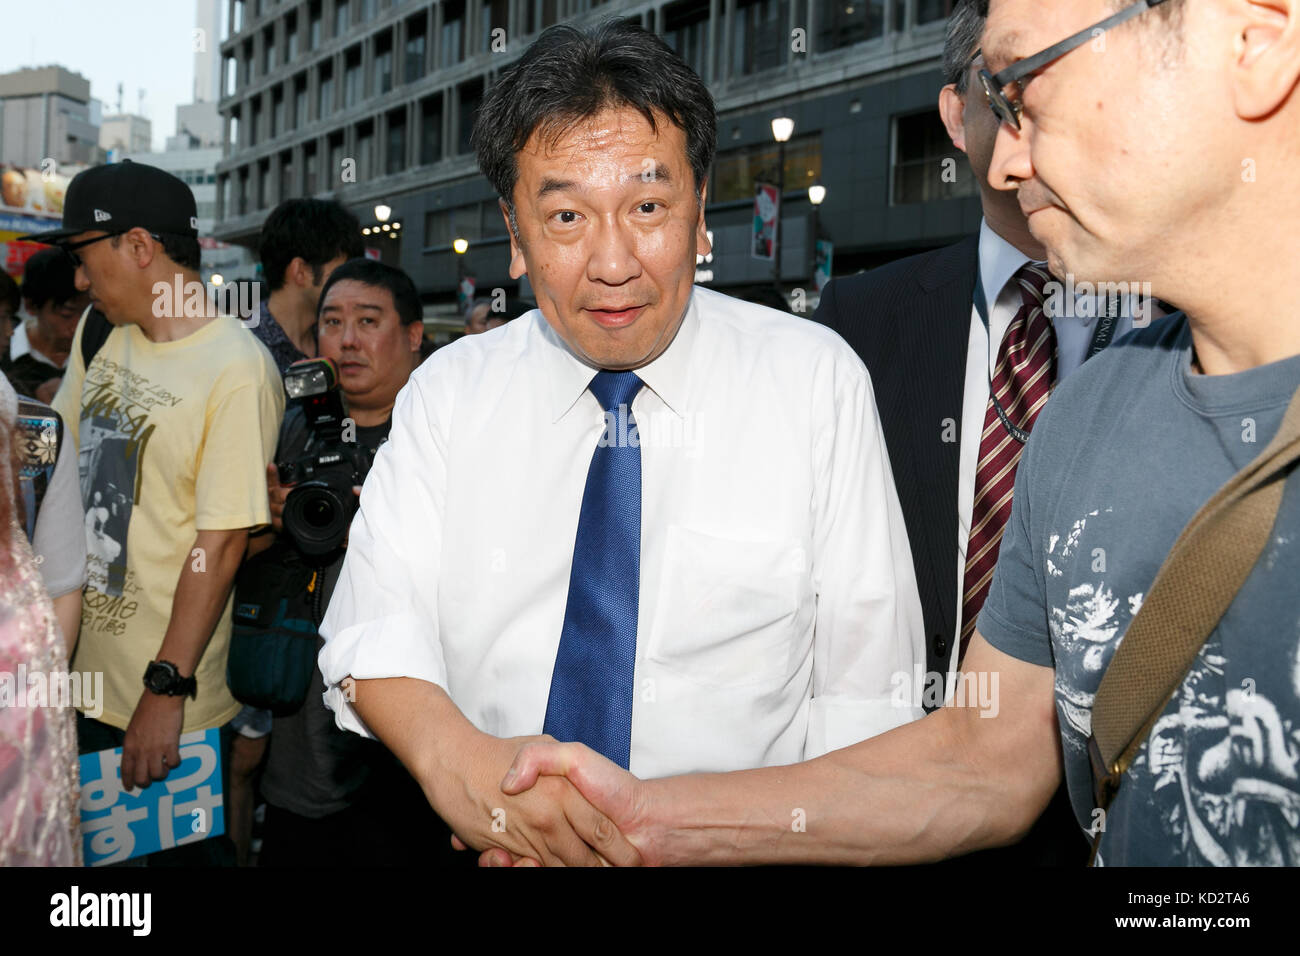 Tokyo, Japan. 10th Oct, 2017. Yukio Edano, leader of the Constitutional Democratic Party of Japan, shakes hands with supporters during a campaign event outside Ikebukuro Station on October 10, 2017, Tokyo, Japan. Edano, head of the newly created Constitutional Democratic Party (CDP) attended a campaign event to support his party's candidate Yosuke Suzuki. Campaigning officially started on October 10 for the October 22 election. Credit: Rodrigo Reyes Marin/AFLO/Alamy Live News Stock Photo